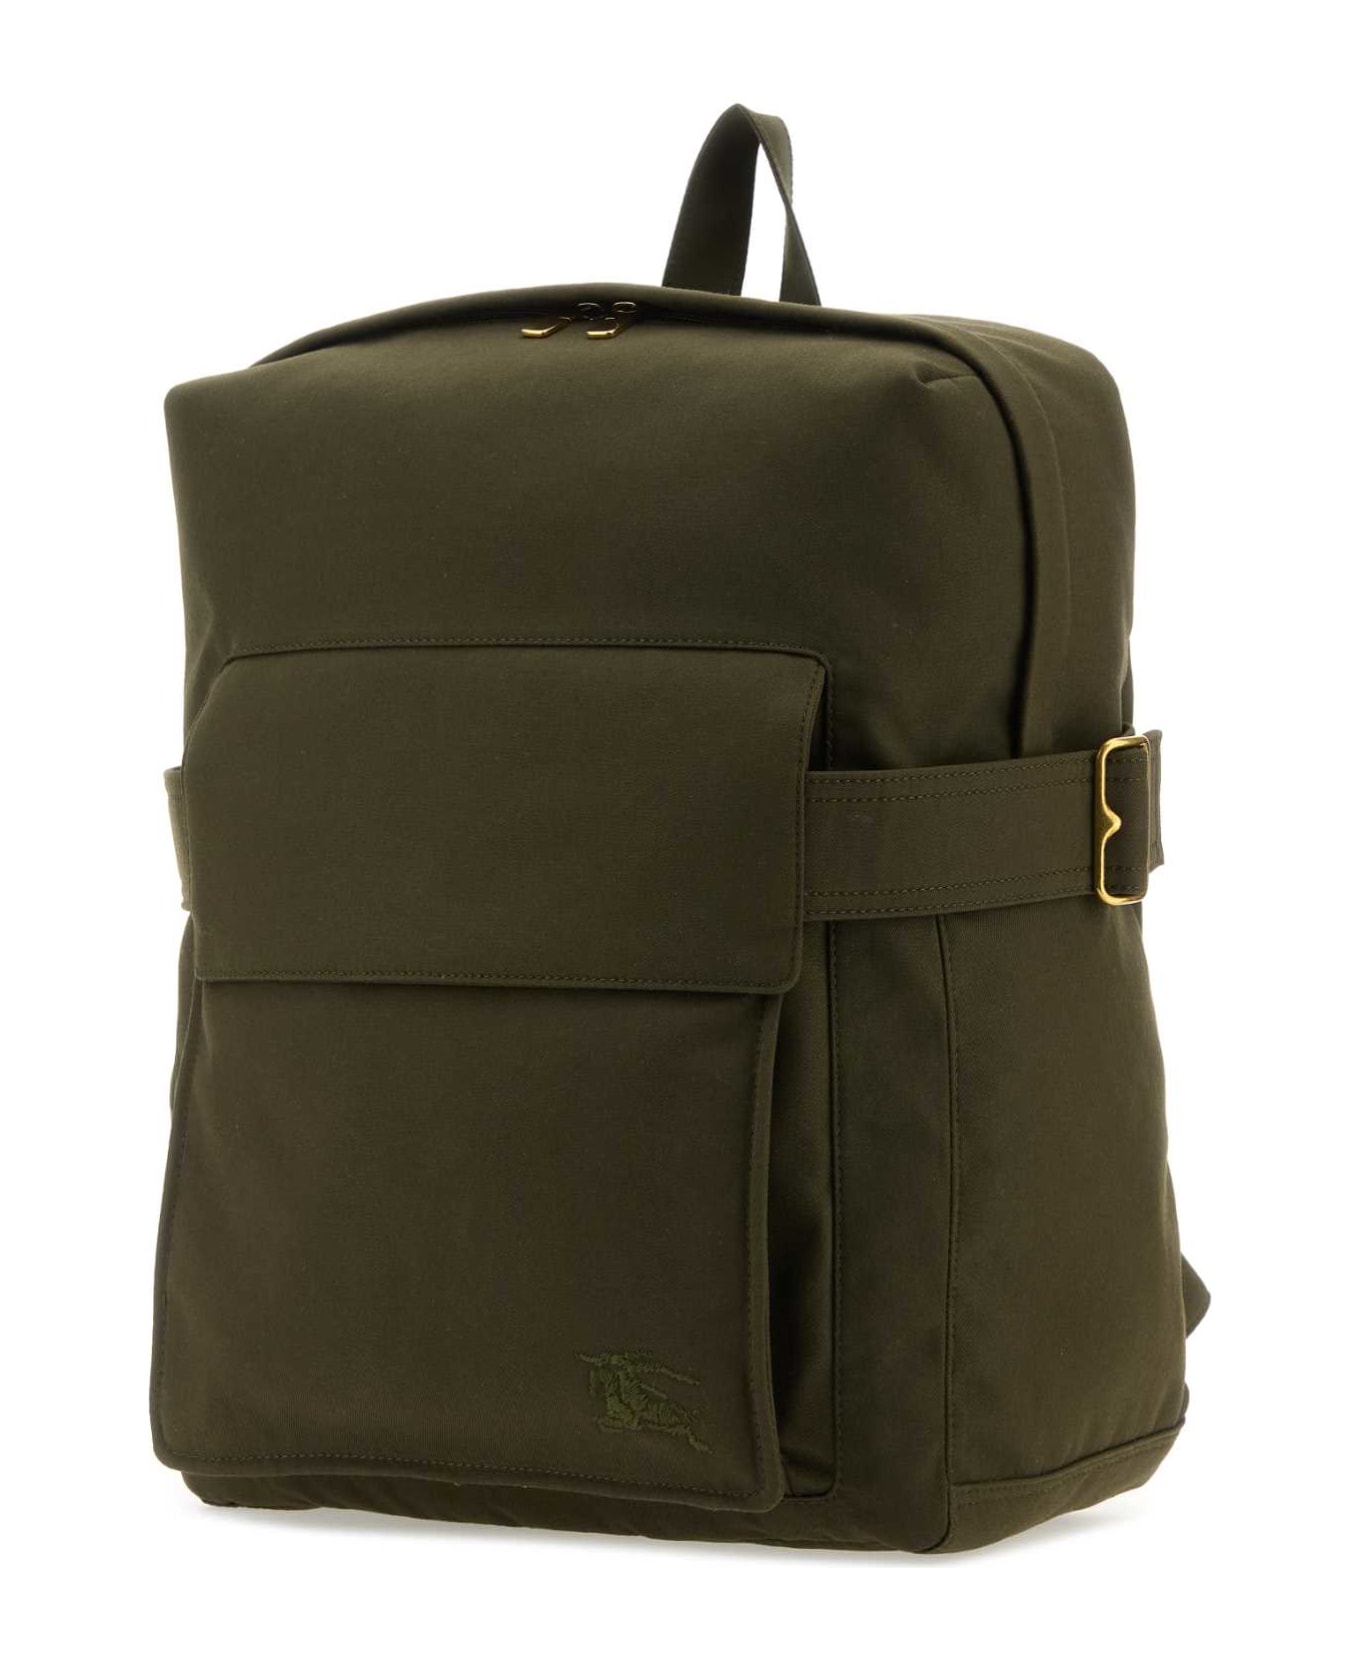 Burberry Army Green Polyester Blend Trench Backpack - MILITARY